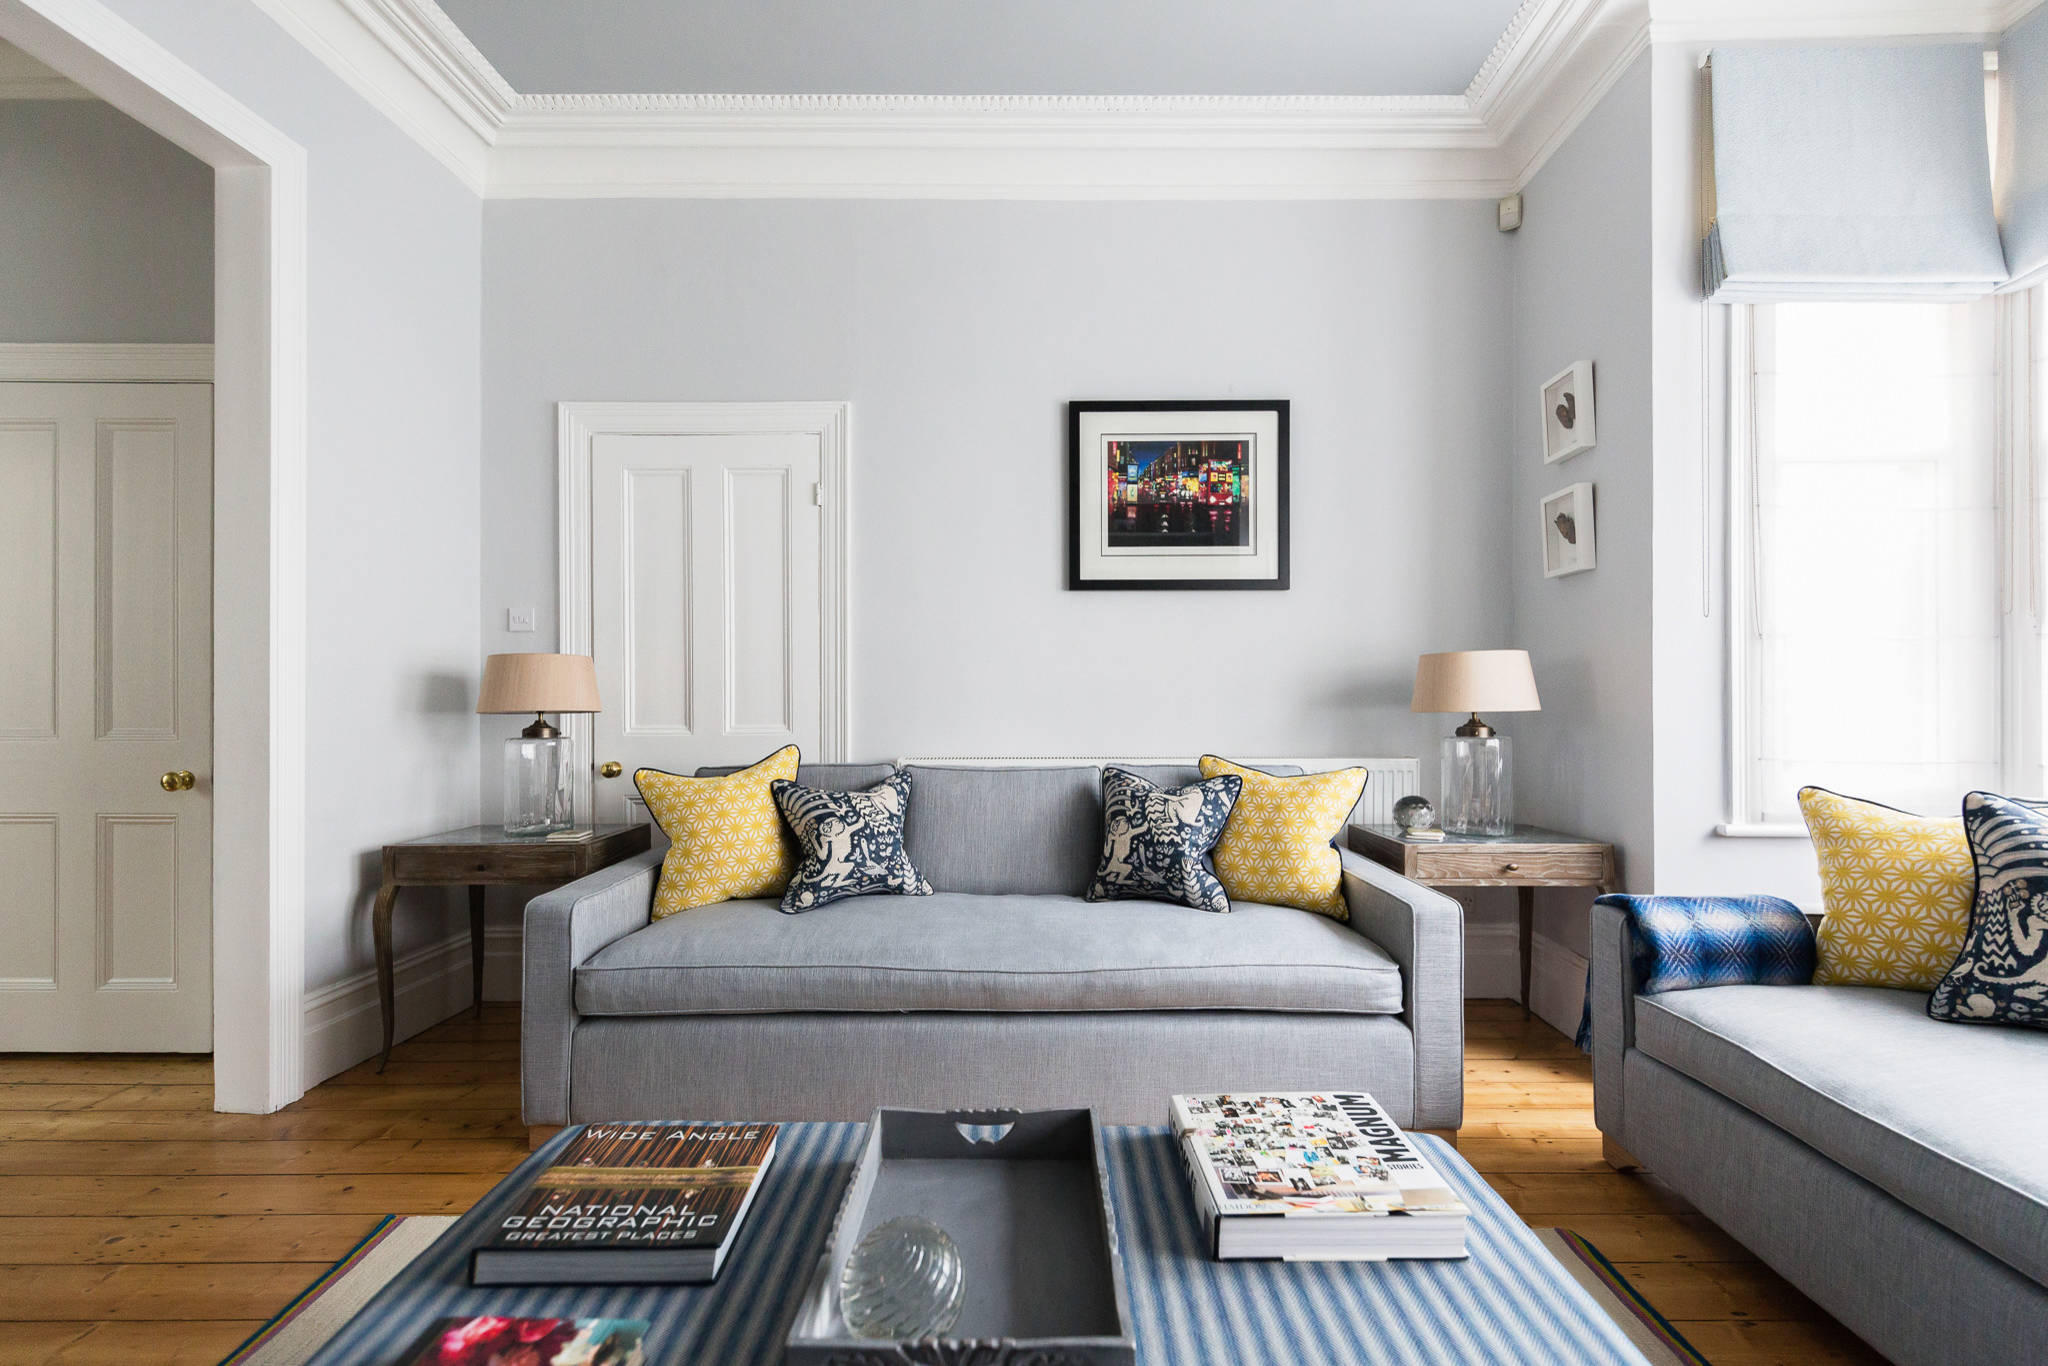 A Bluffer's Guide to Identifying Period Features | Houzz UK